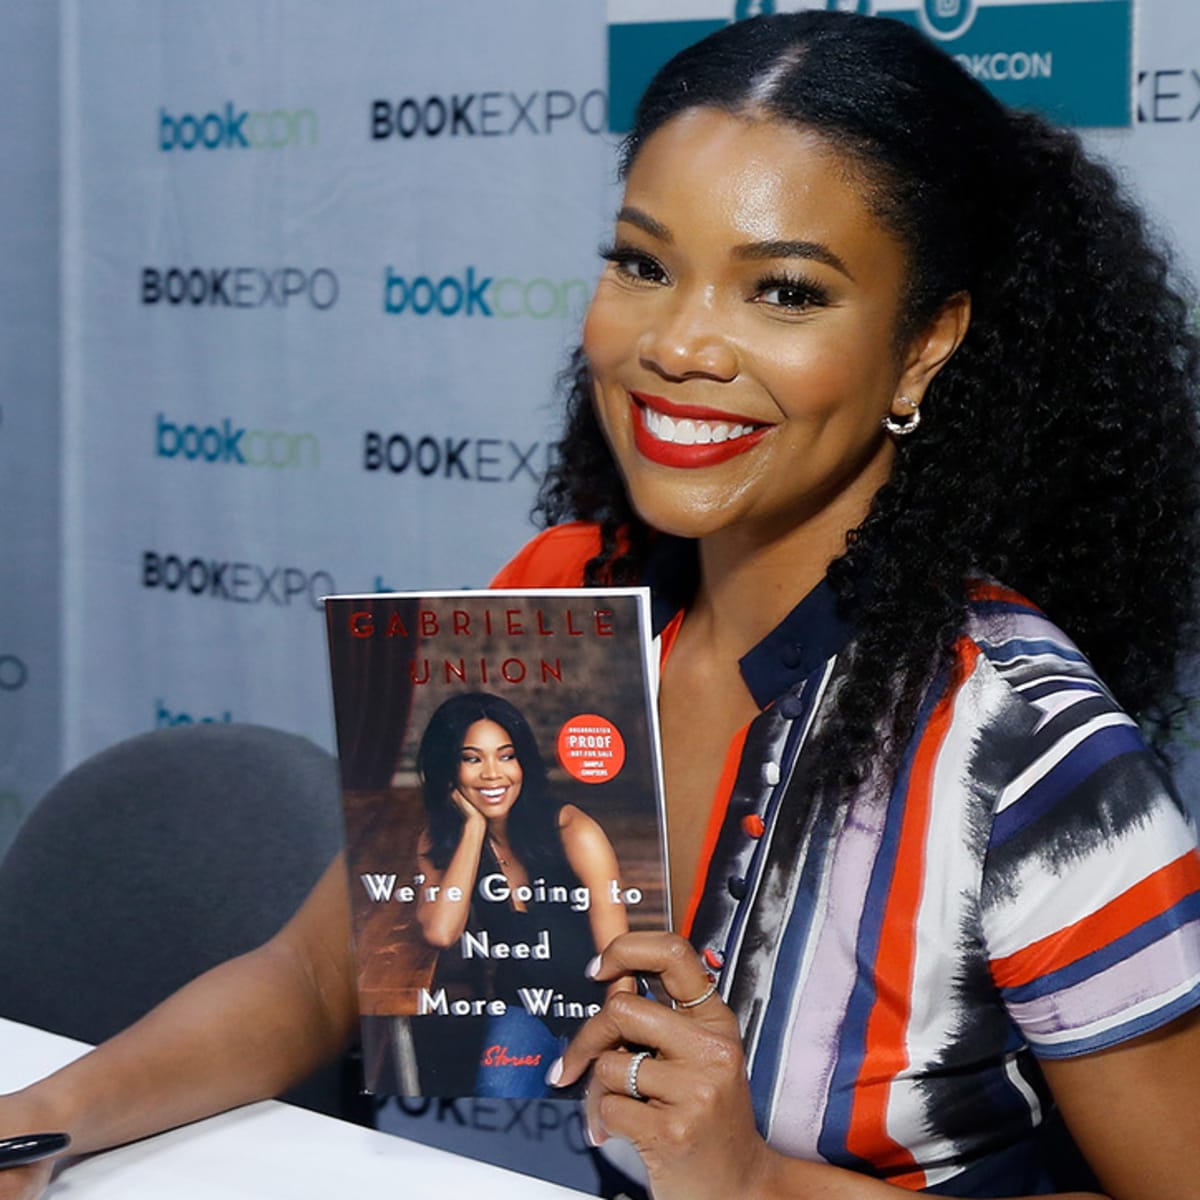 We're Going to Need More Wine: Stories by Gabrielle Union